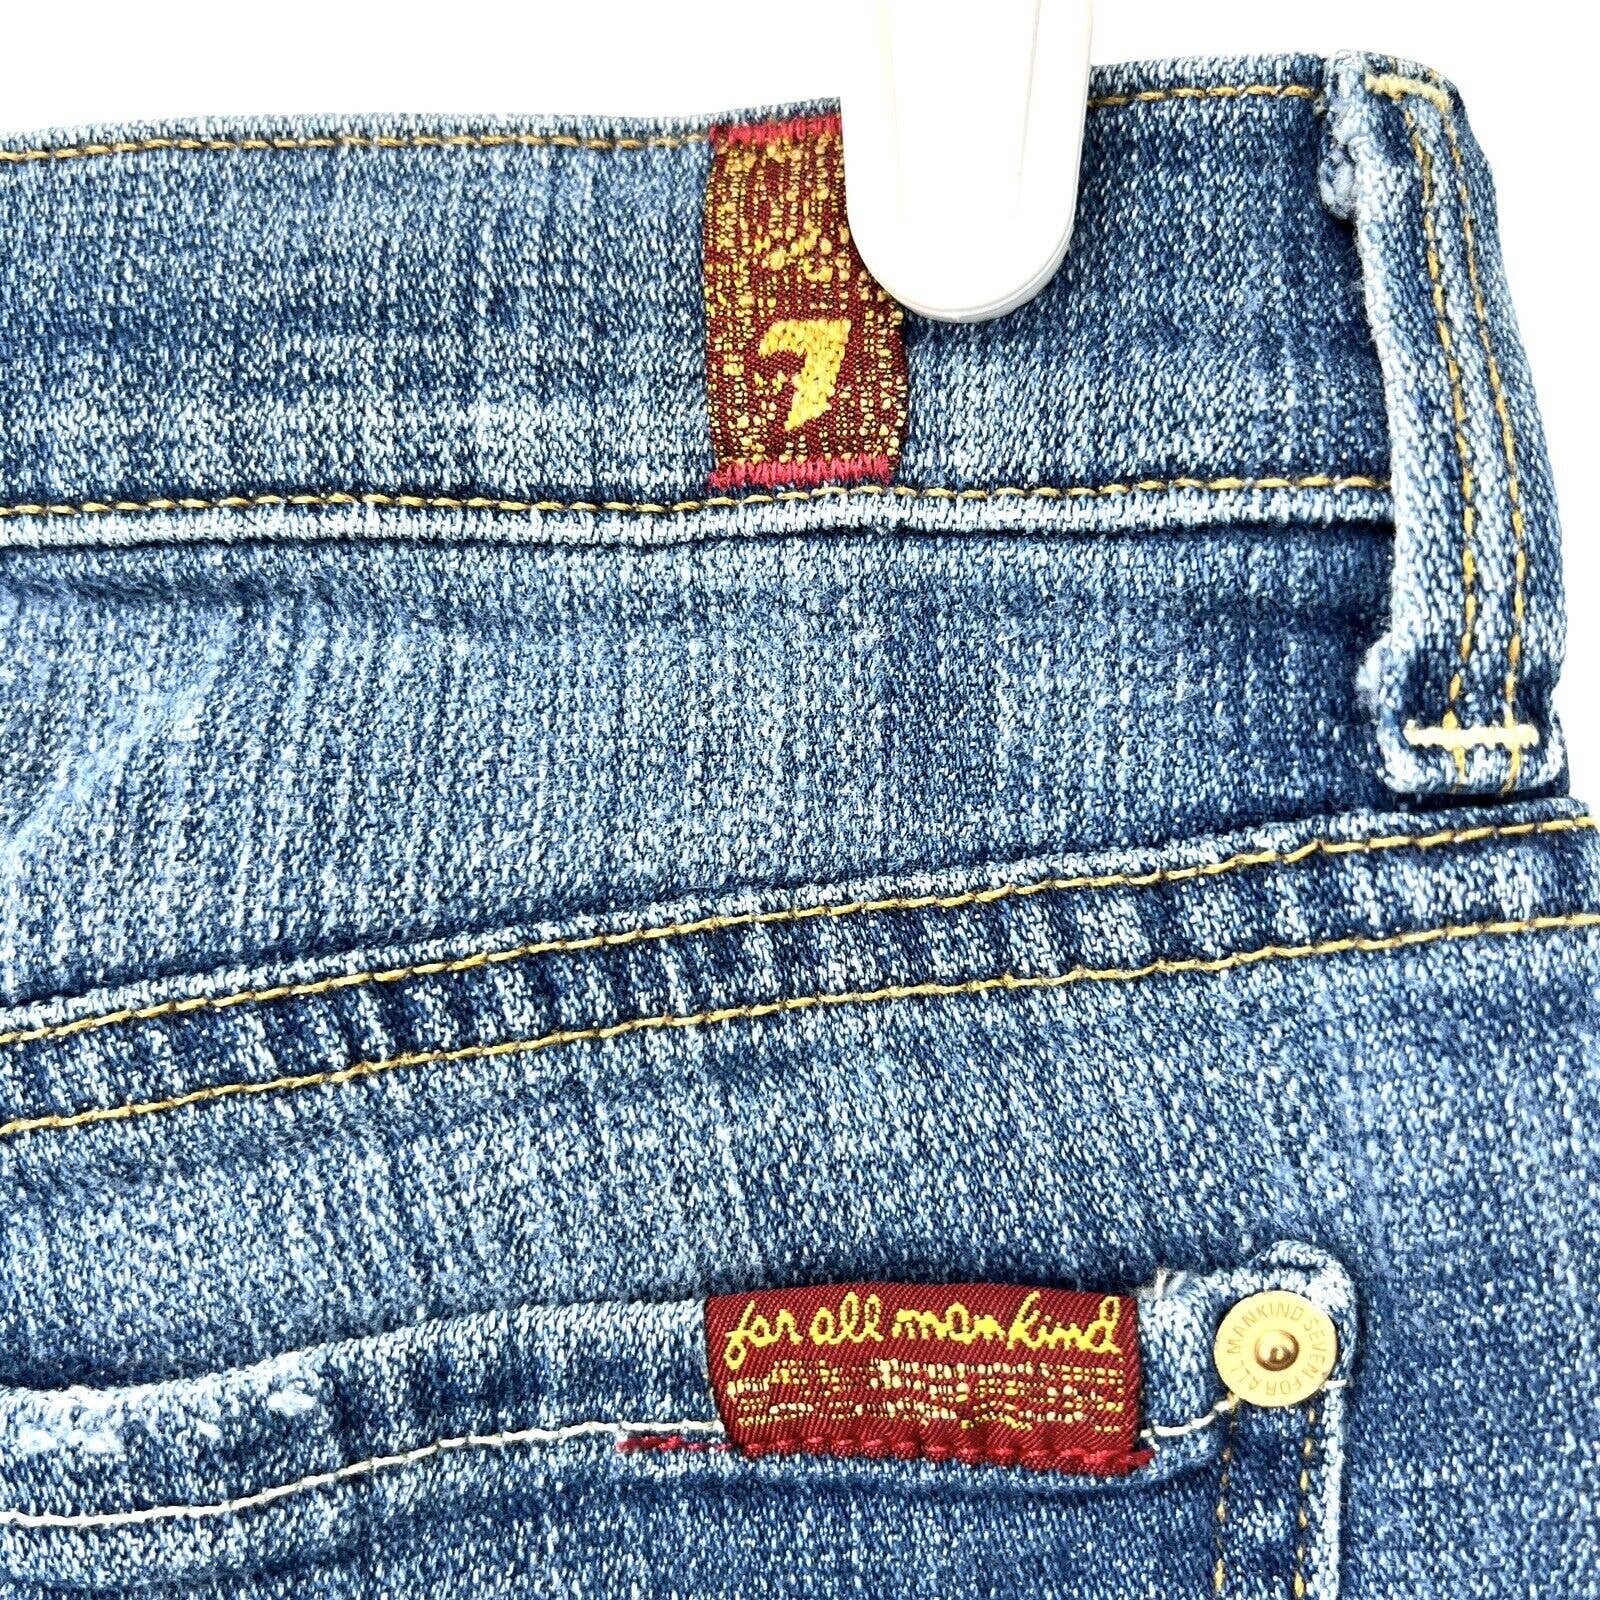 high discount 7 for all mankind Womens Modern Straight Leg Mid Rise Blue Jeans Size 25 (26x31) G7i2lHTro well sale